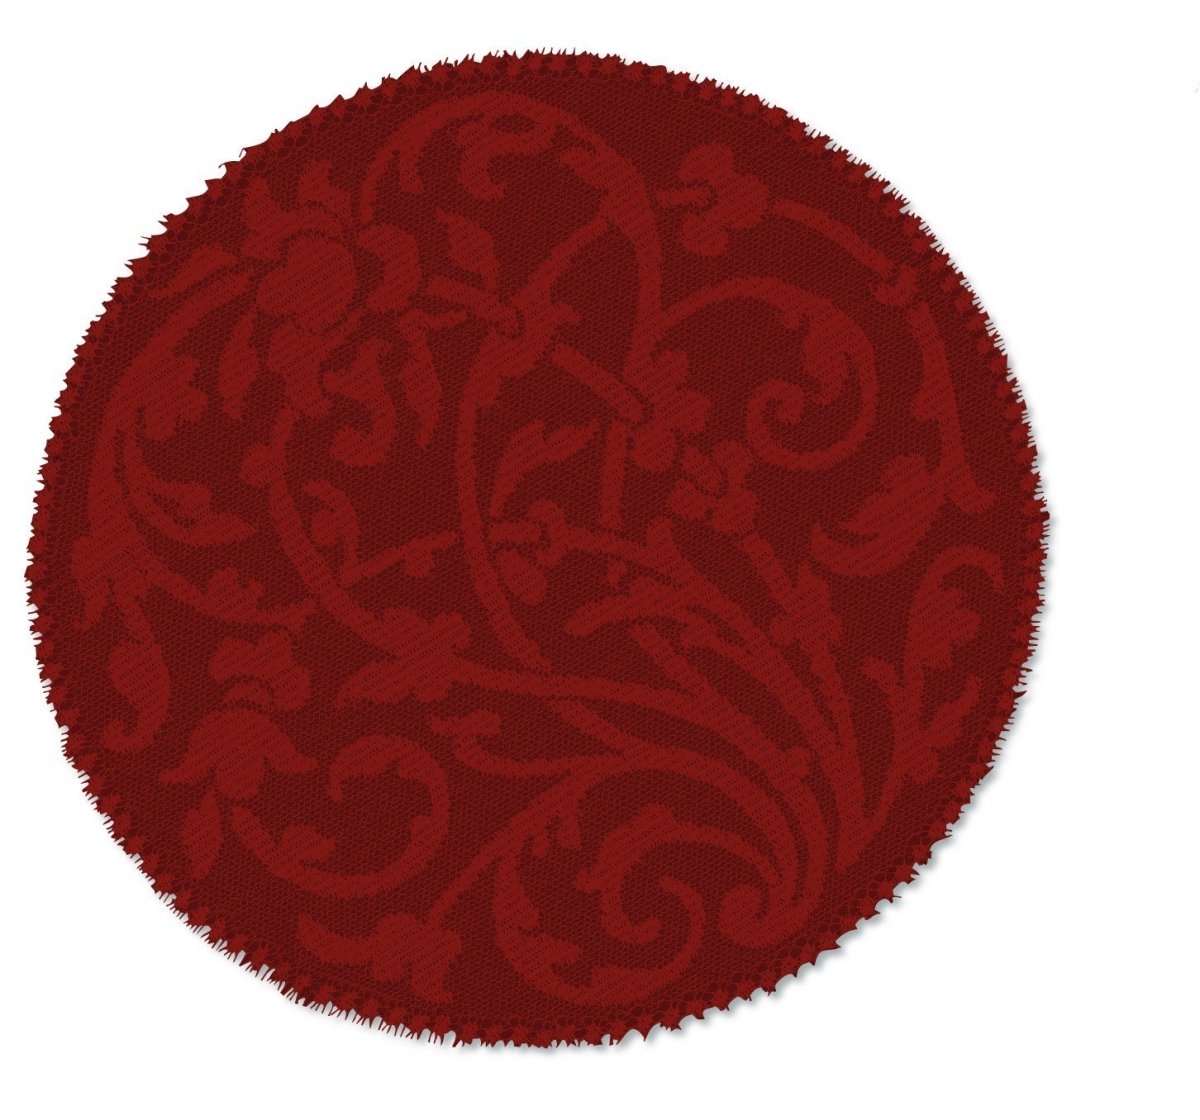 Rn-1200pk Rondeau 12 In. Round Doily, Paprika